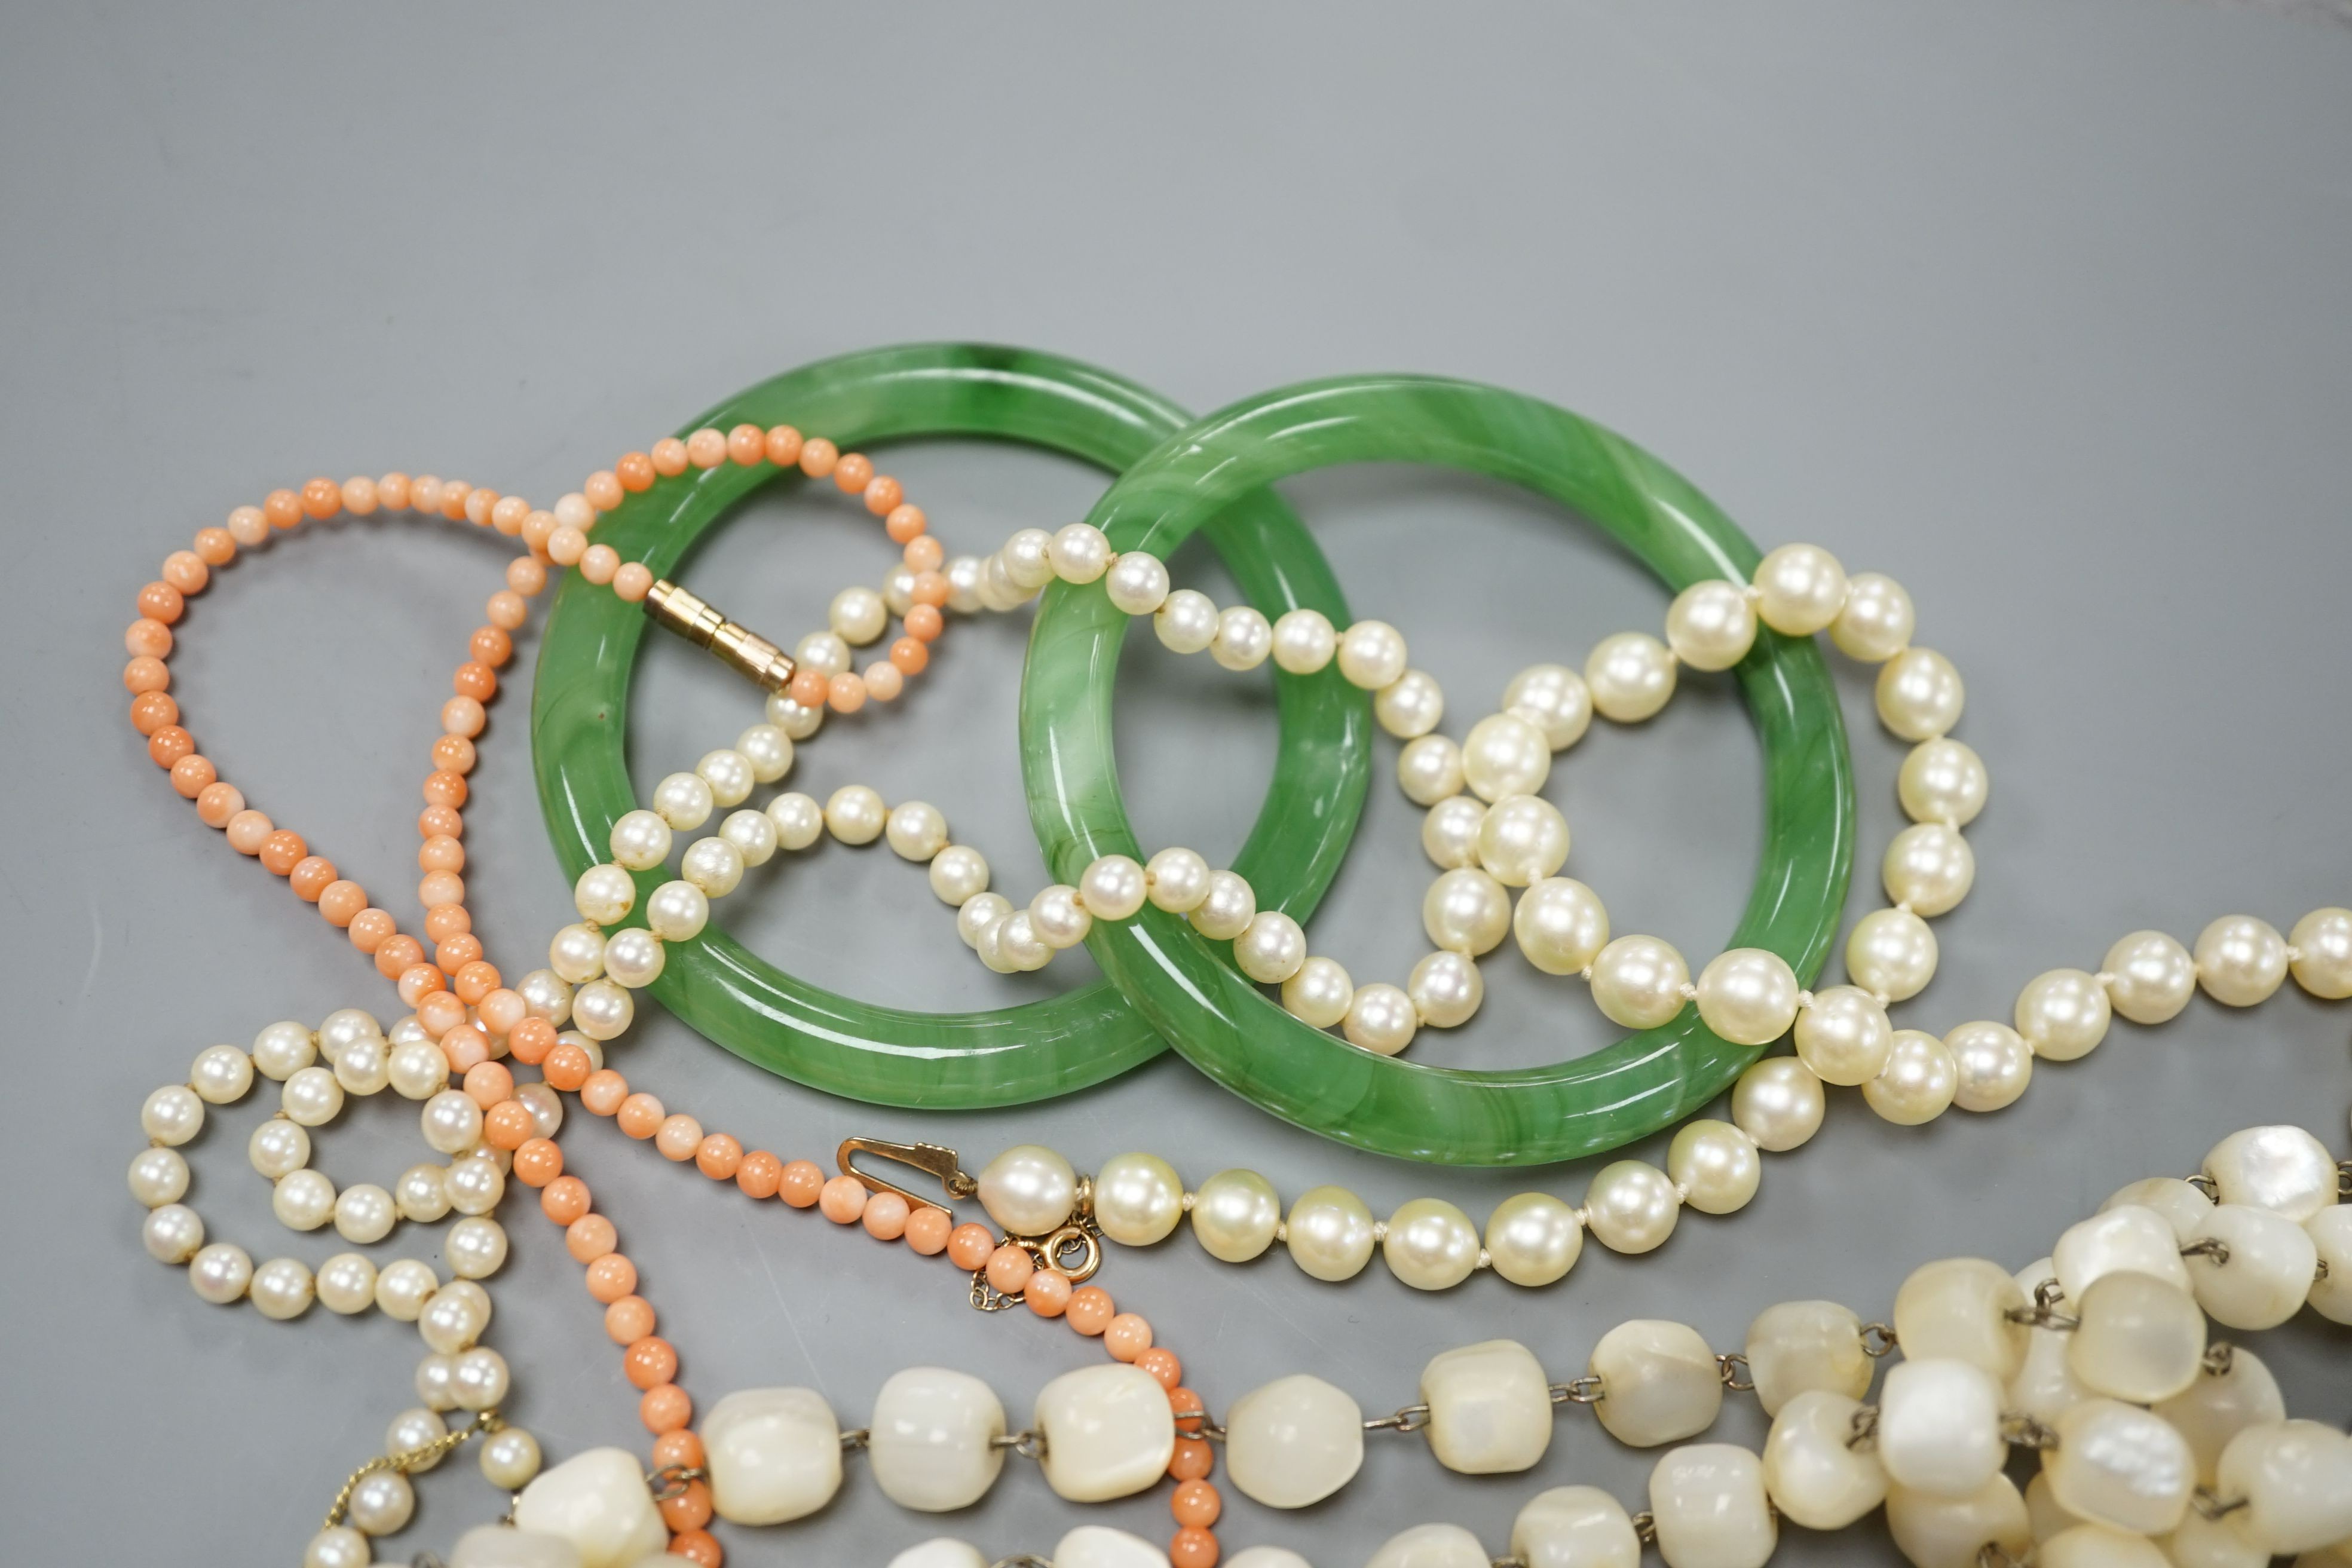 Two single strand cultured pearl necklaces, one with 9ct gold clasp, two green glass bangles, a coral bead necklace and a mother of pearl bead necklace.